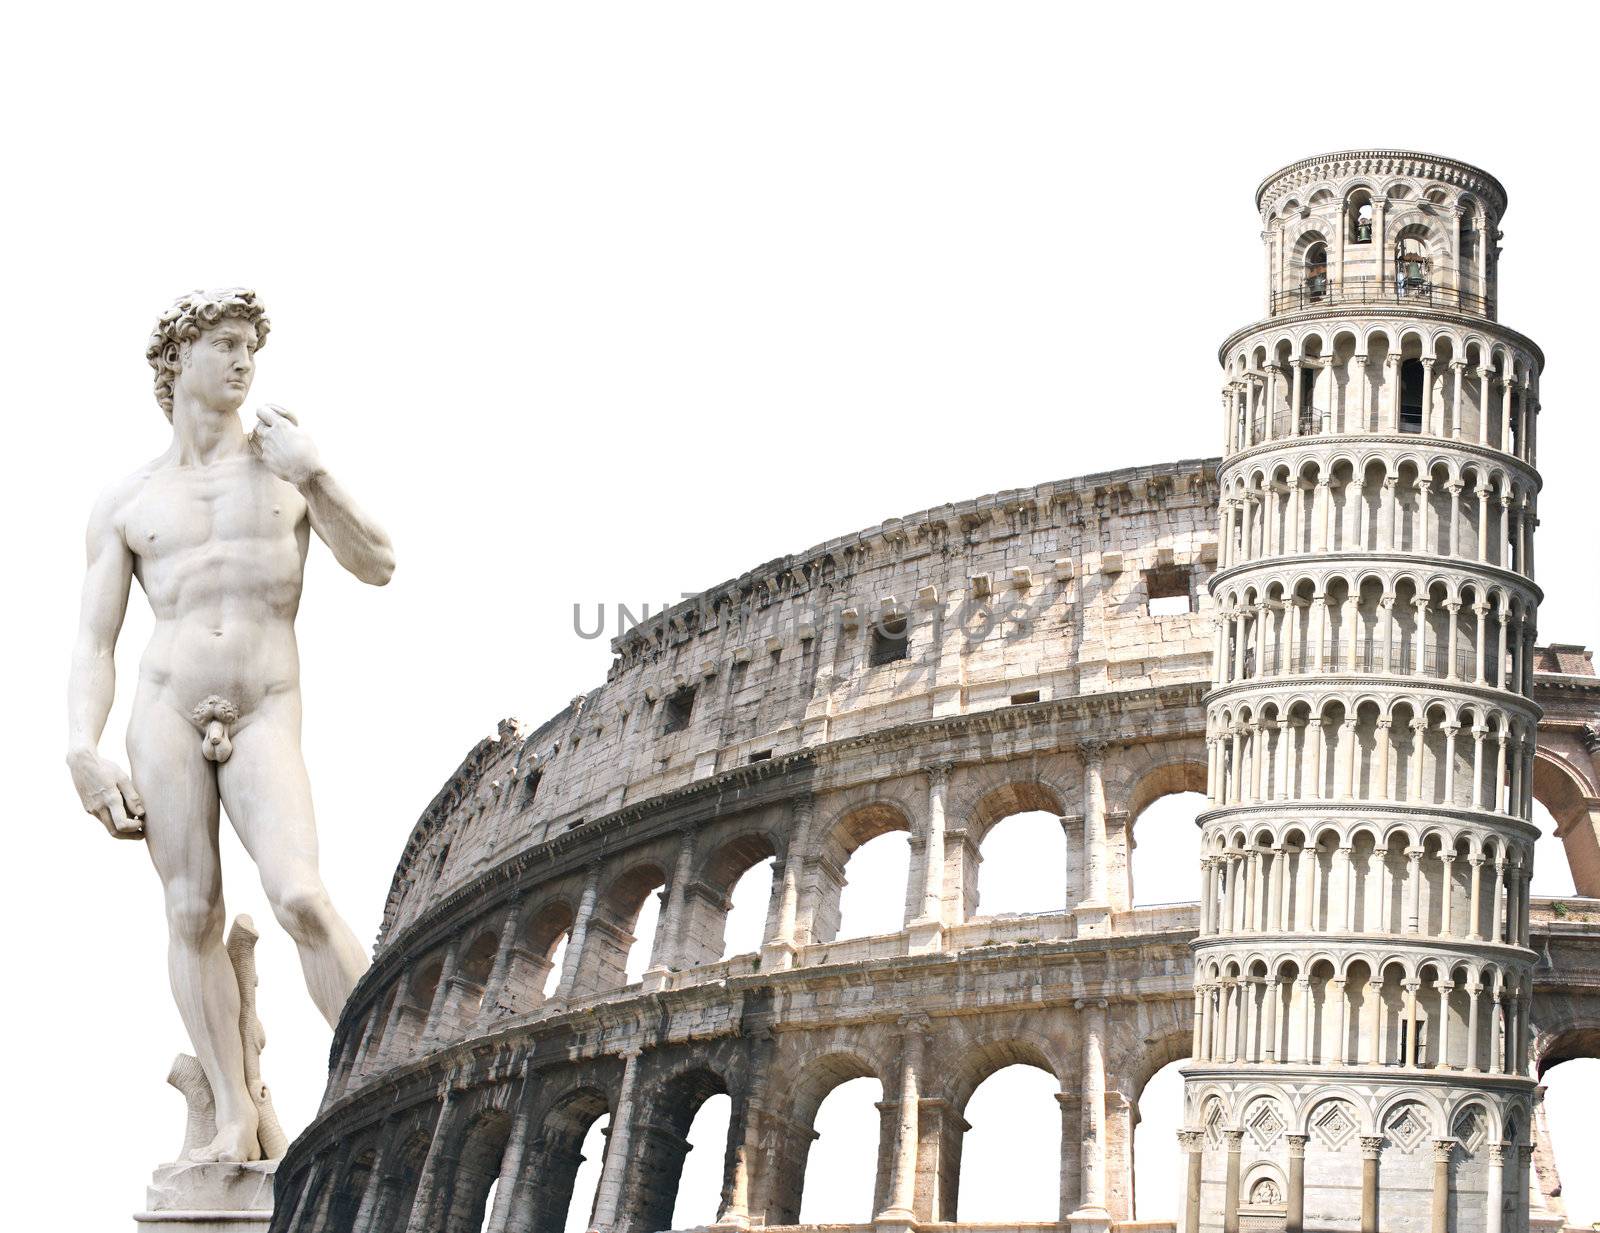 Leaning Tower of Pisa, Colosseum and Michelangelo's David by frenta